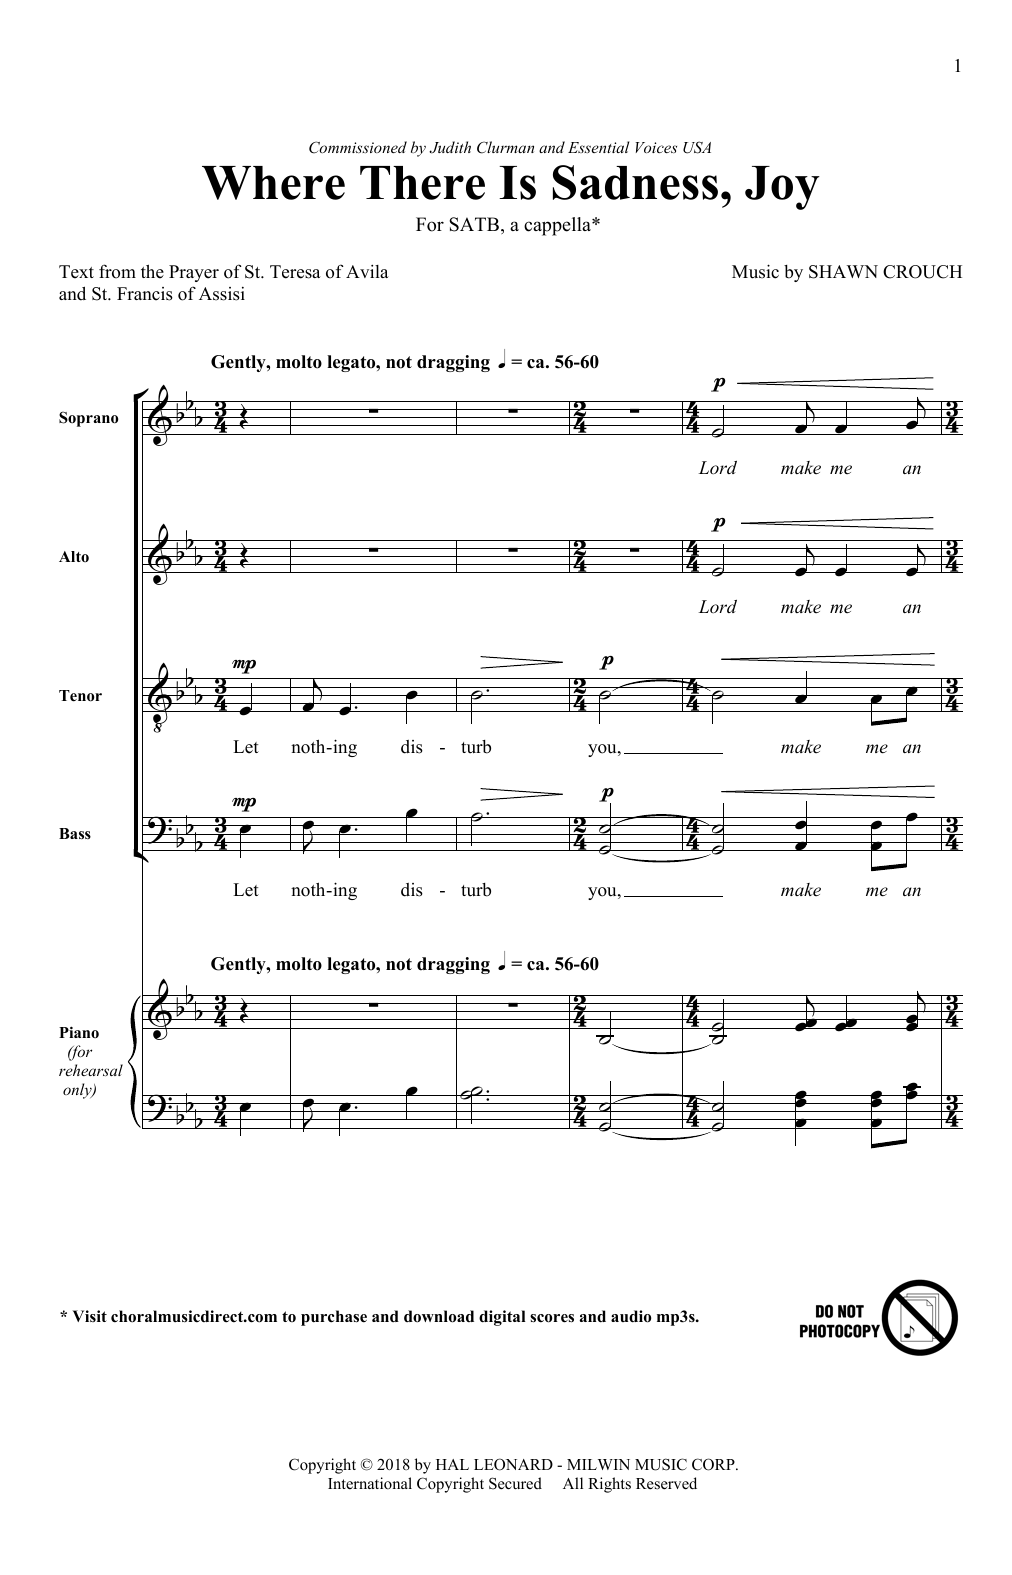 Download Shawn Crouch Where There Is Sadness, Joy Sheet Music